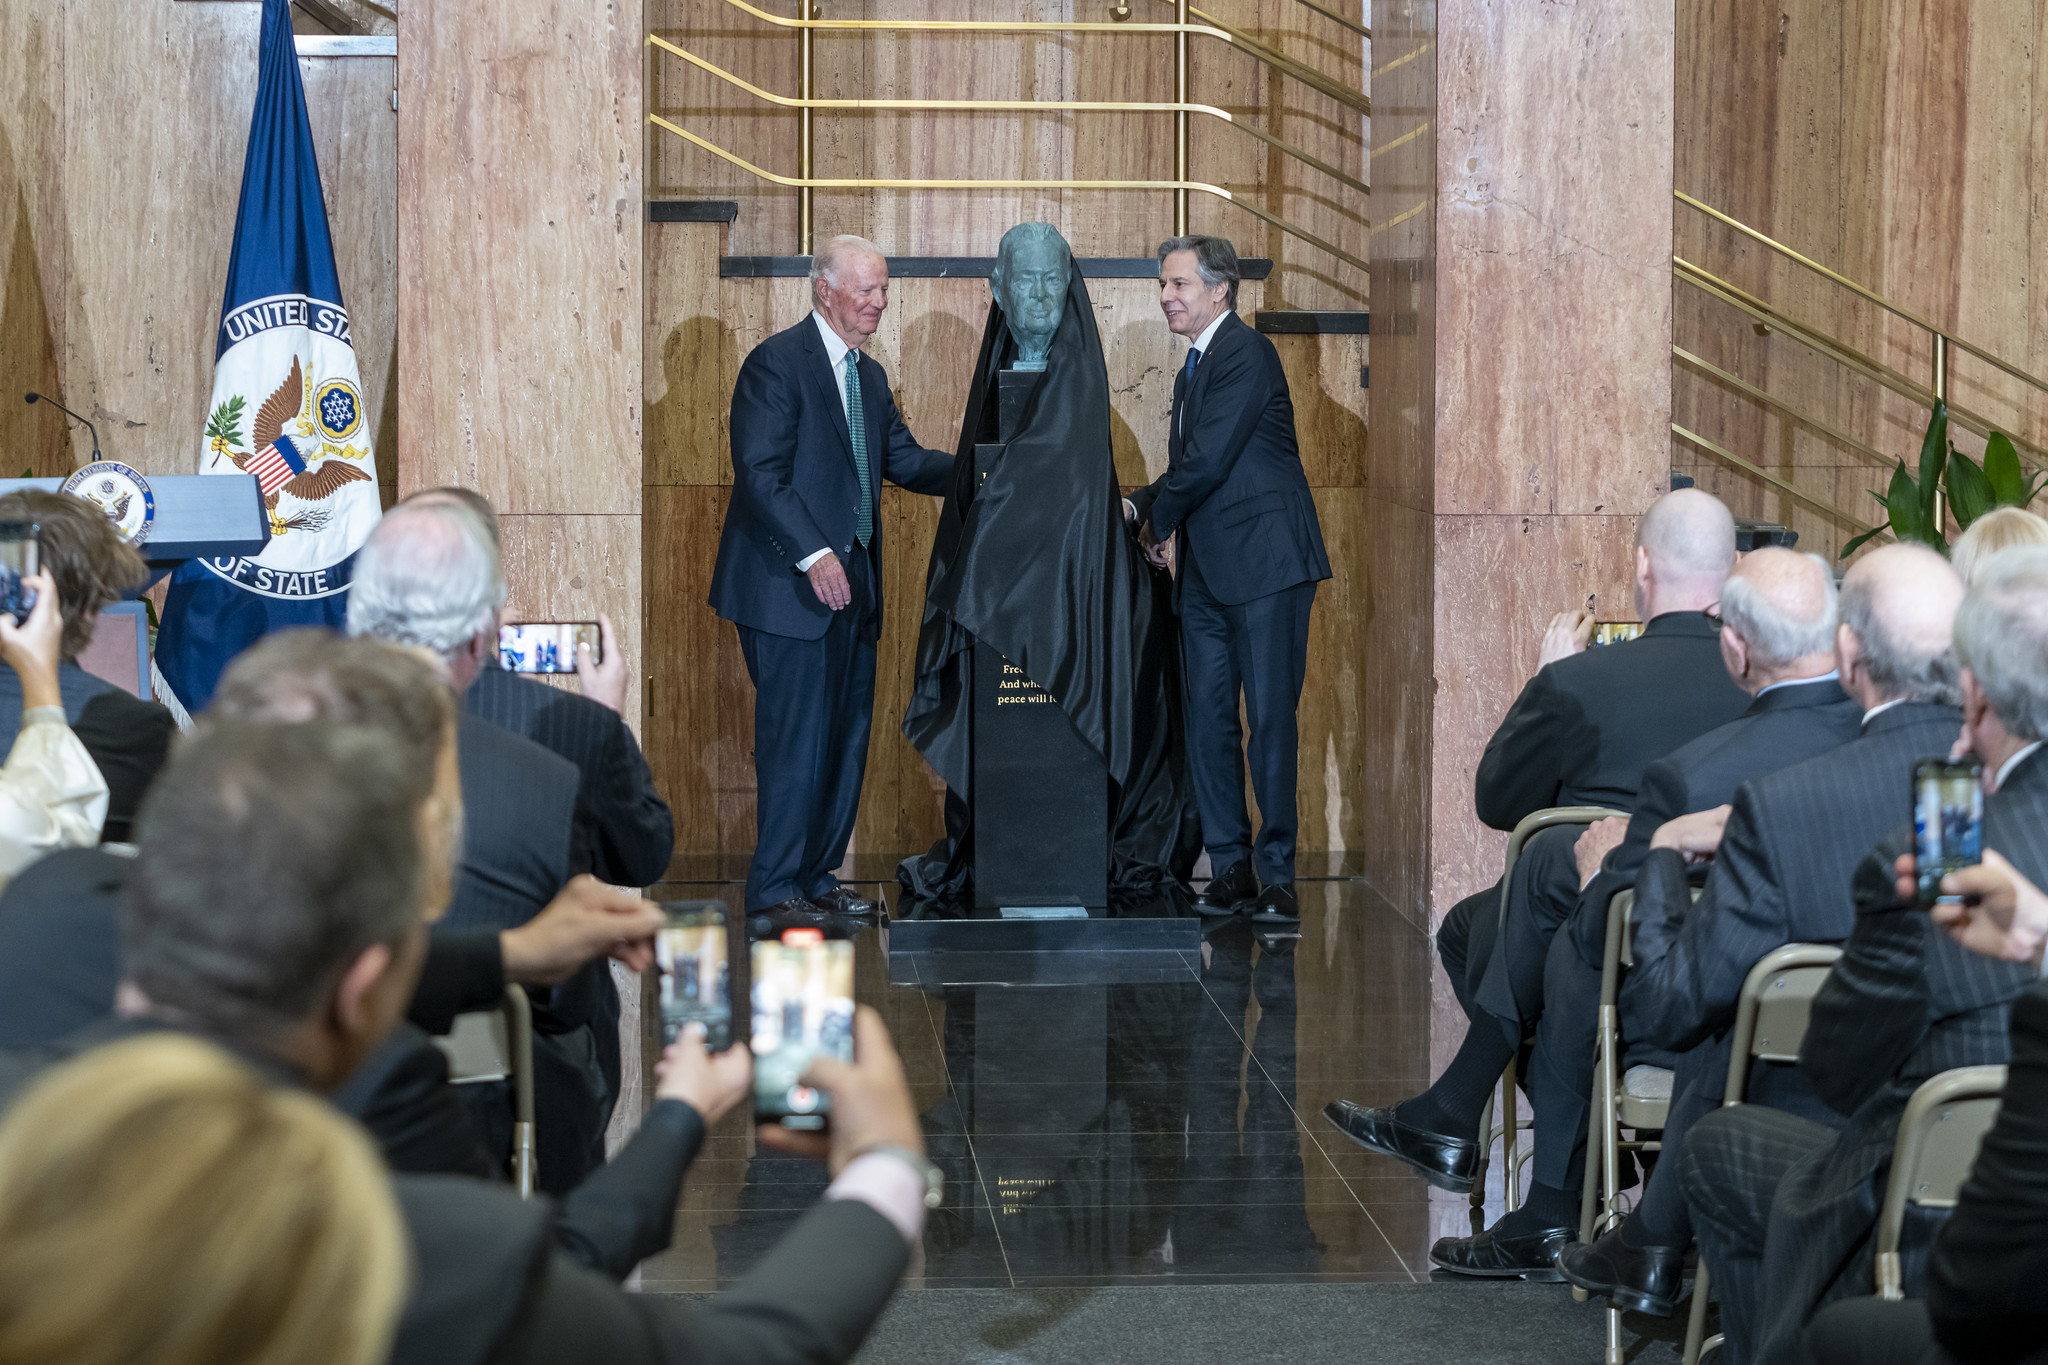 James Baker and Antony Blinken take a veil off of a bronze bust of James Baker in front of an audience